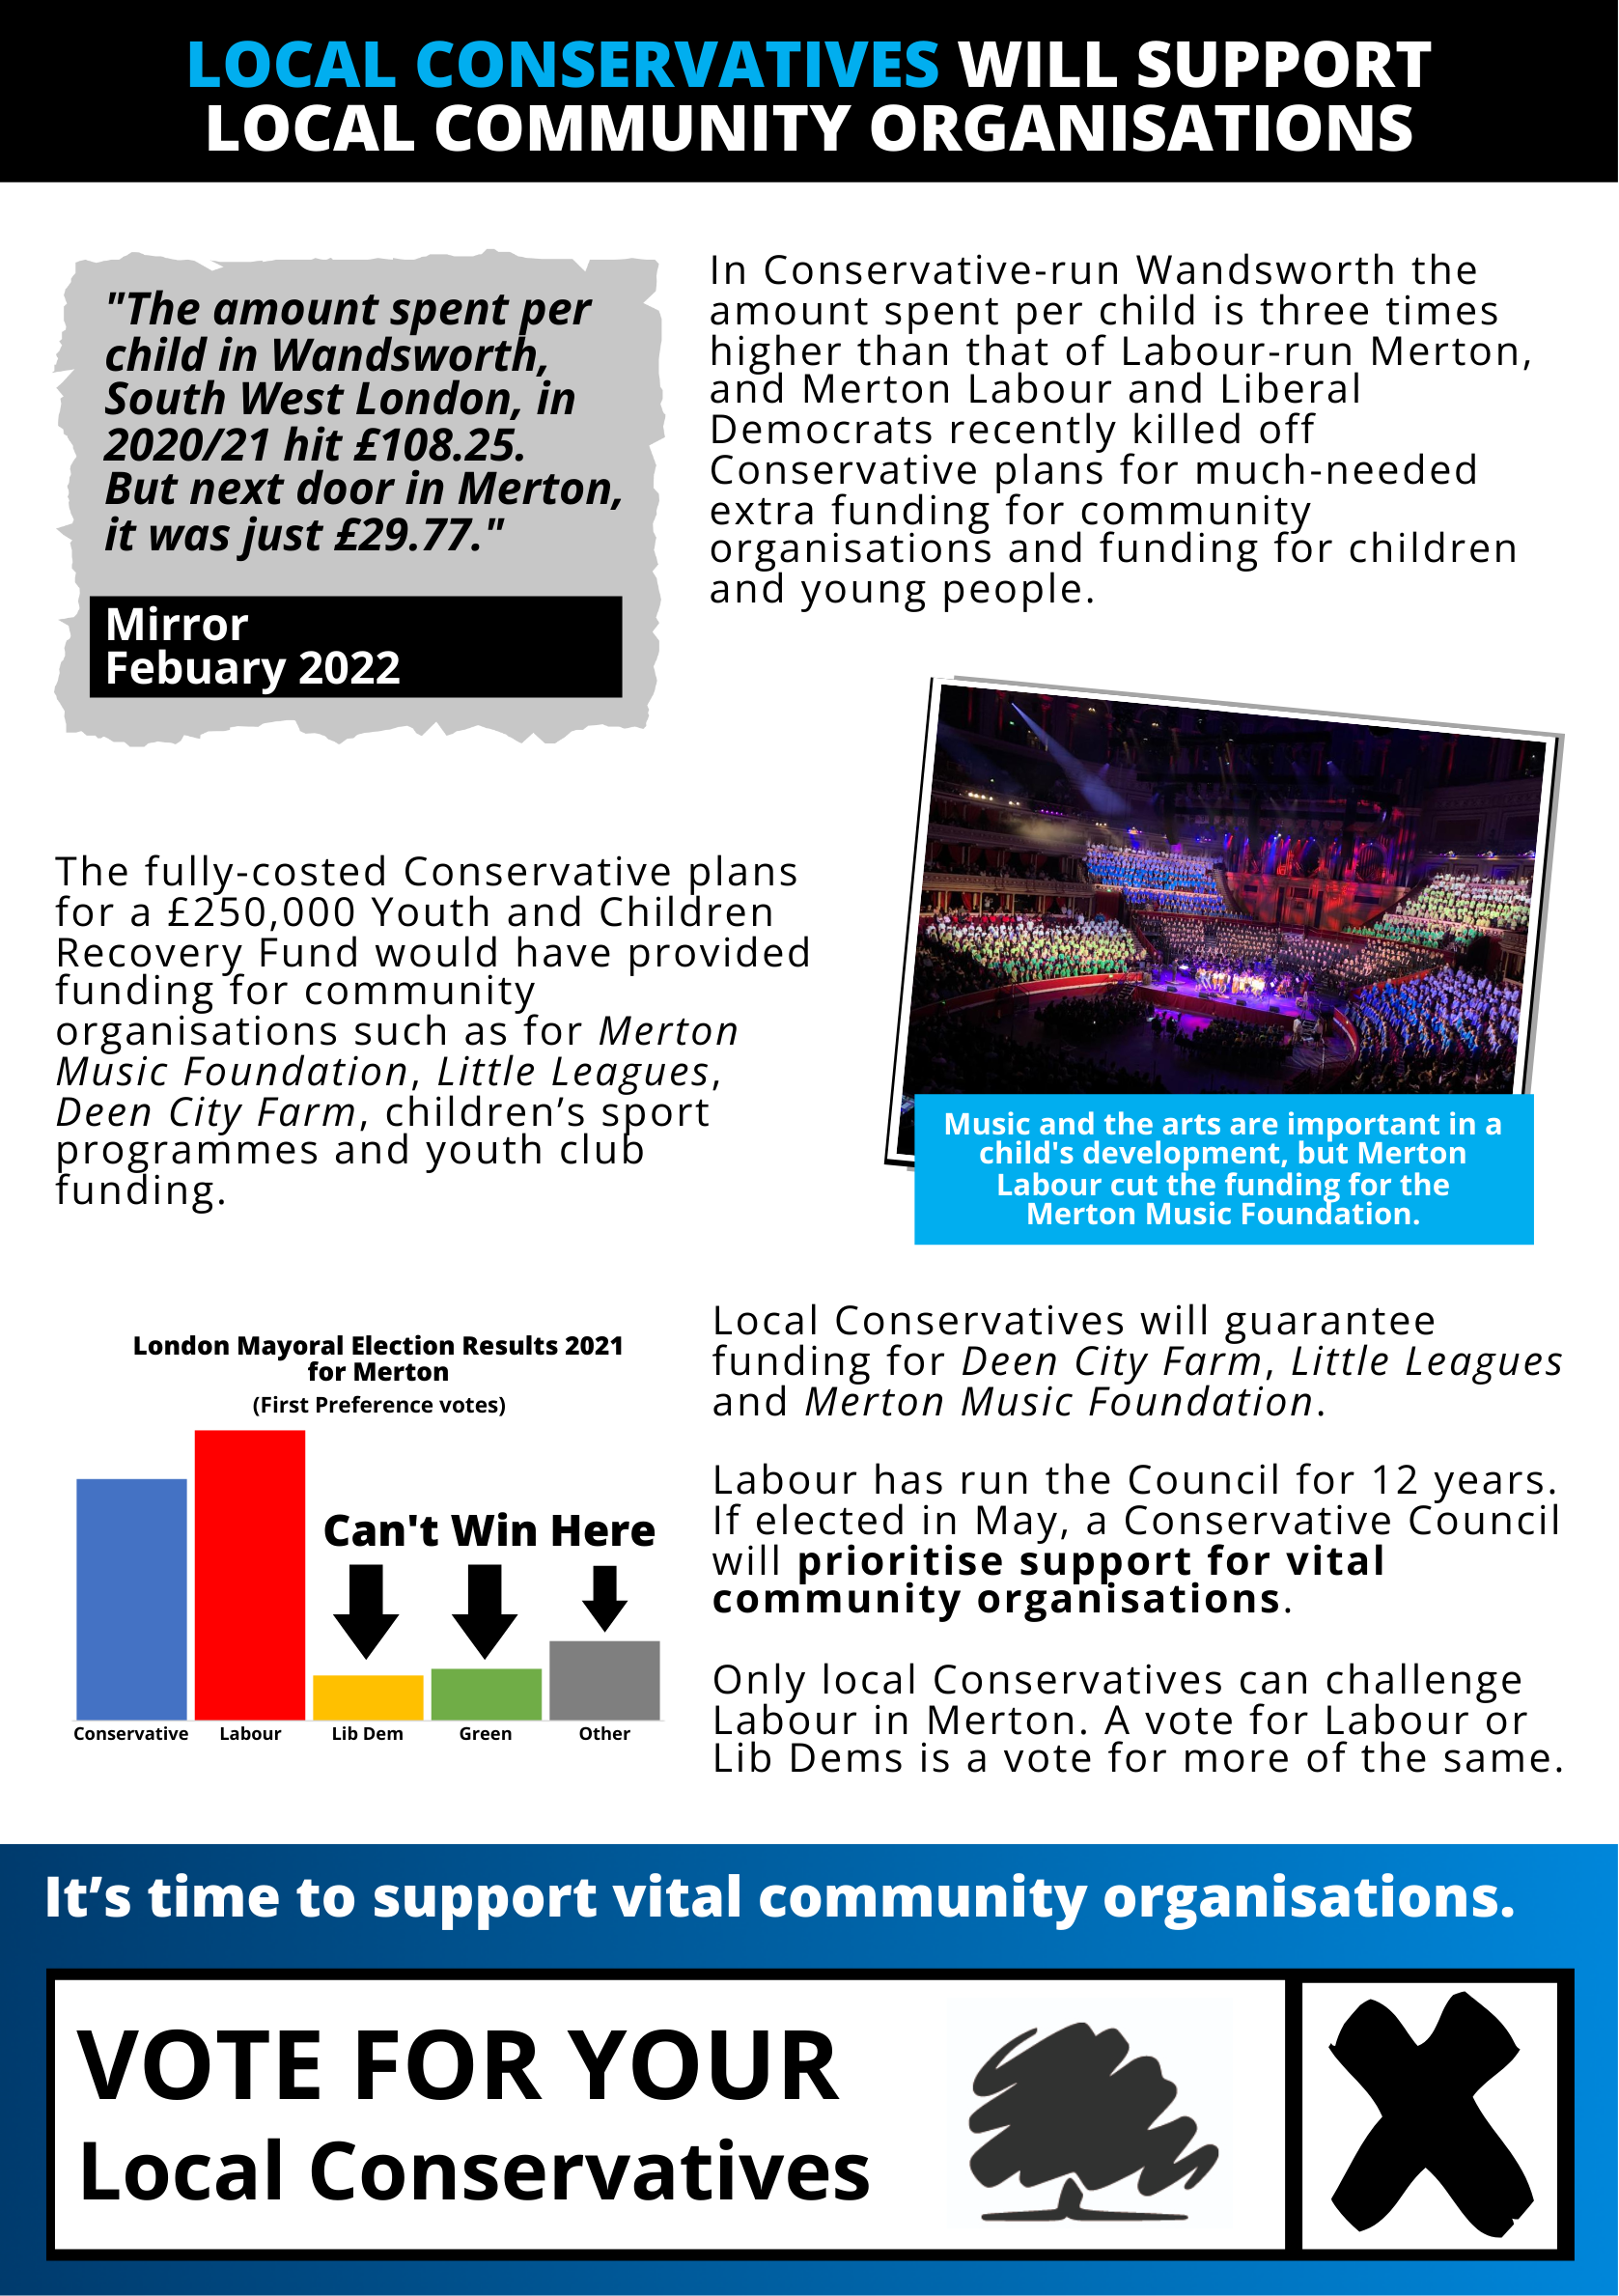 information on how local Conservatives will support community organisations